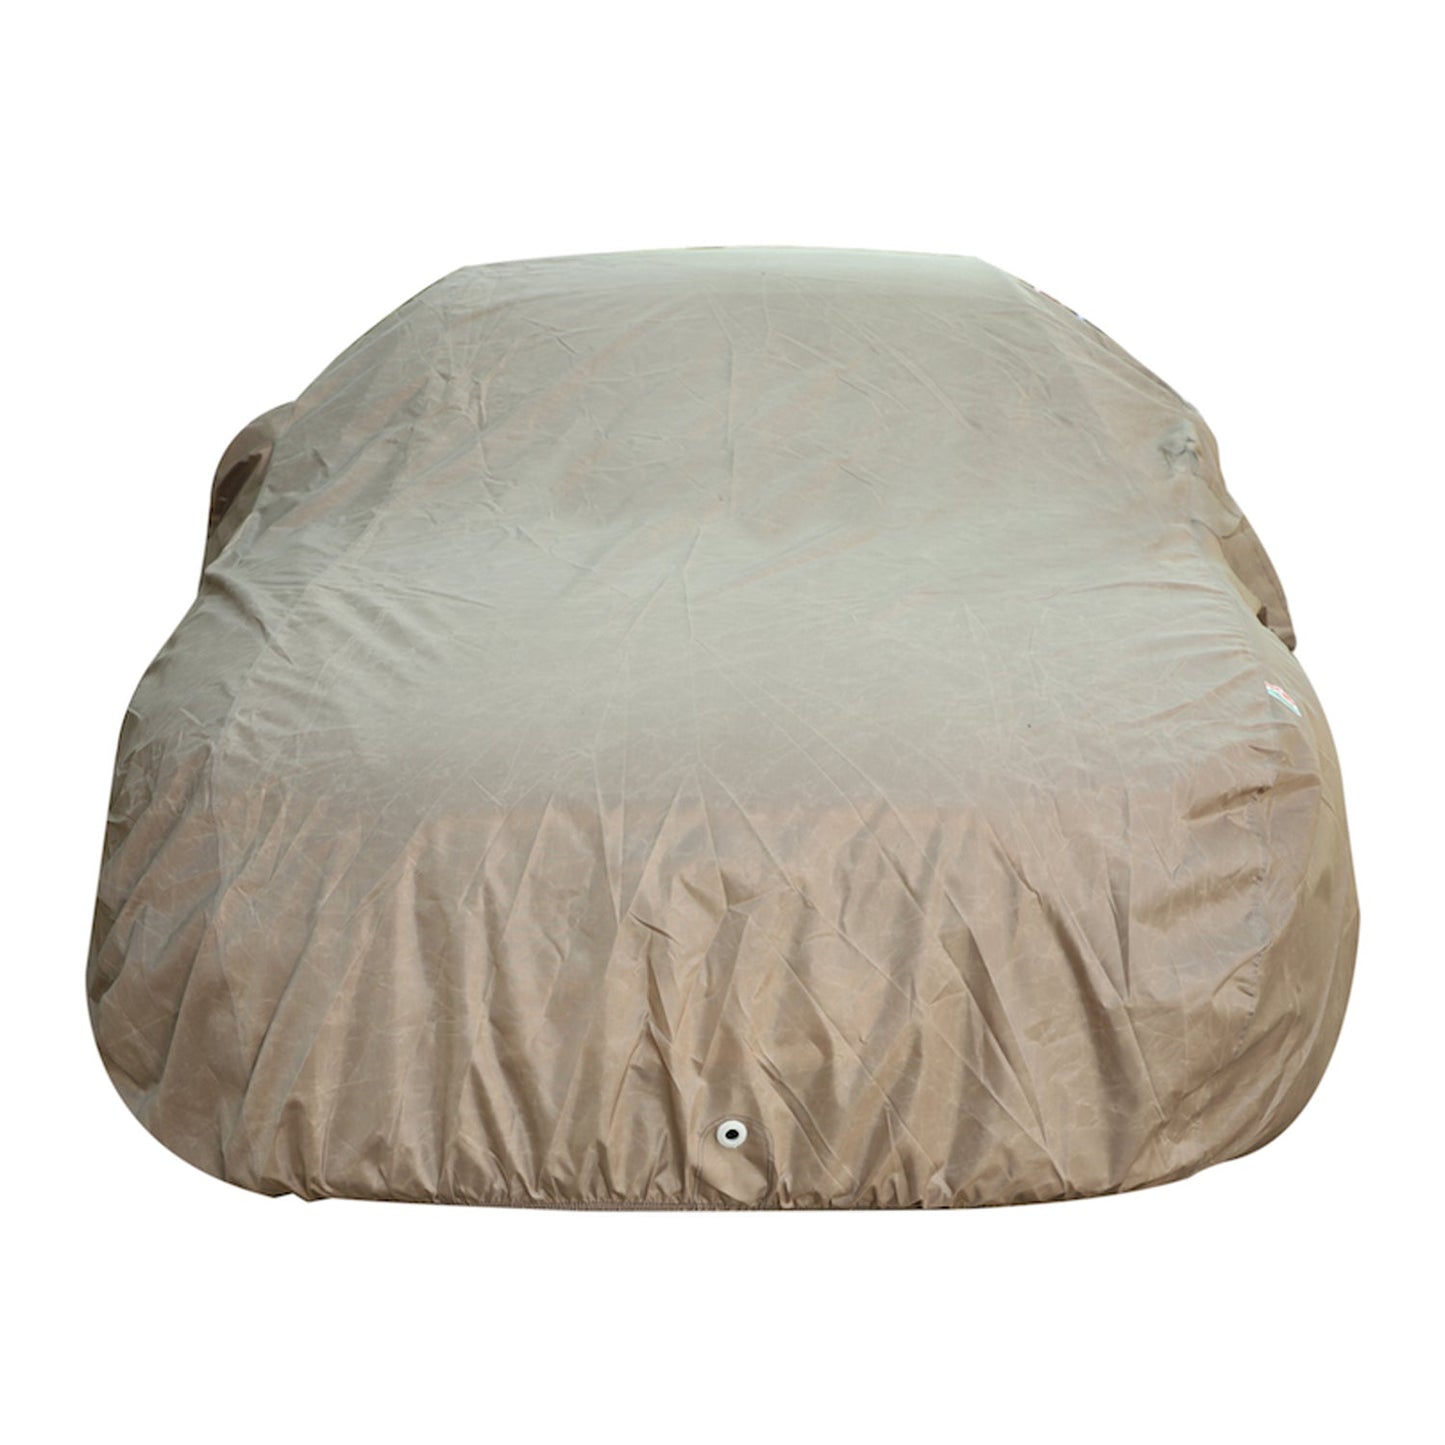 Oshotto Brown 100% Waterproof Car Body Cover with Mirror Pockets For BMW 3 Series